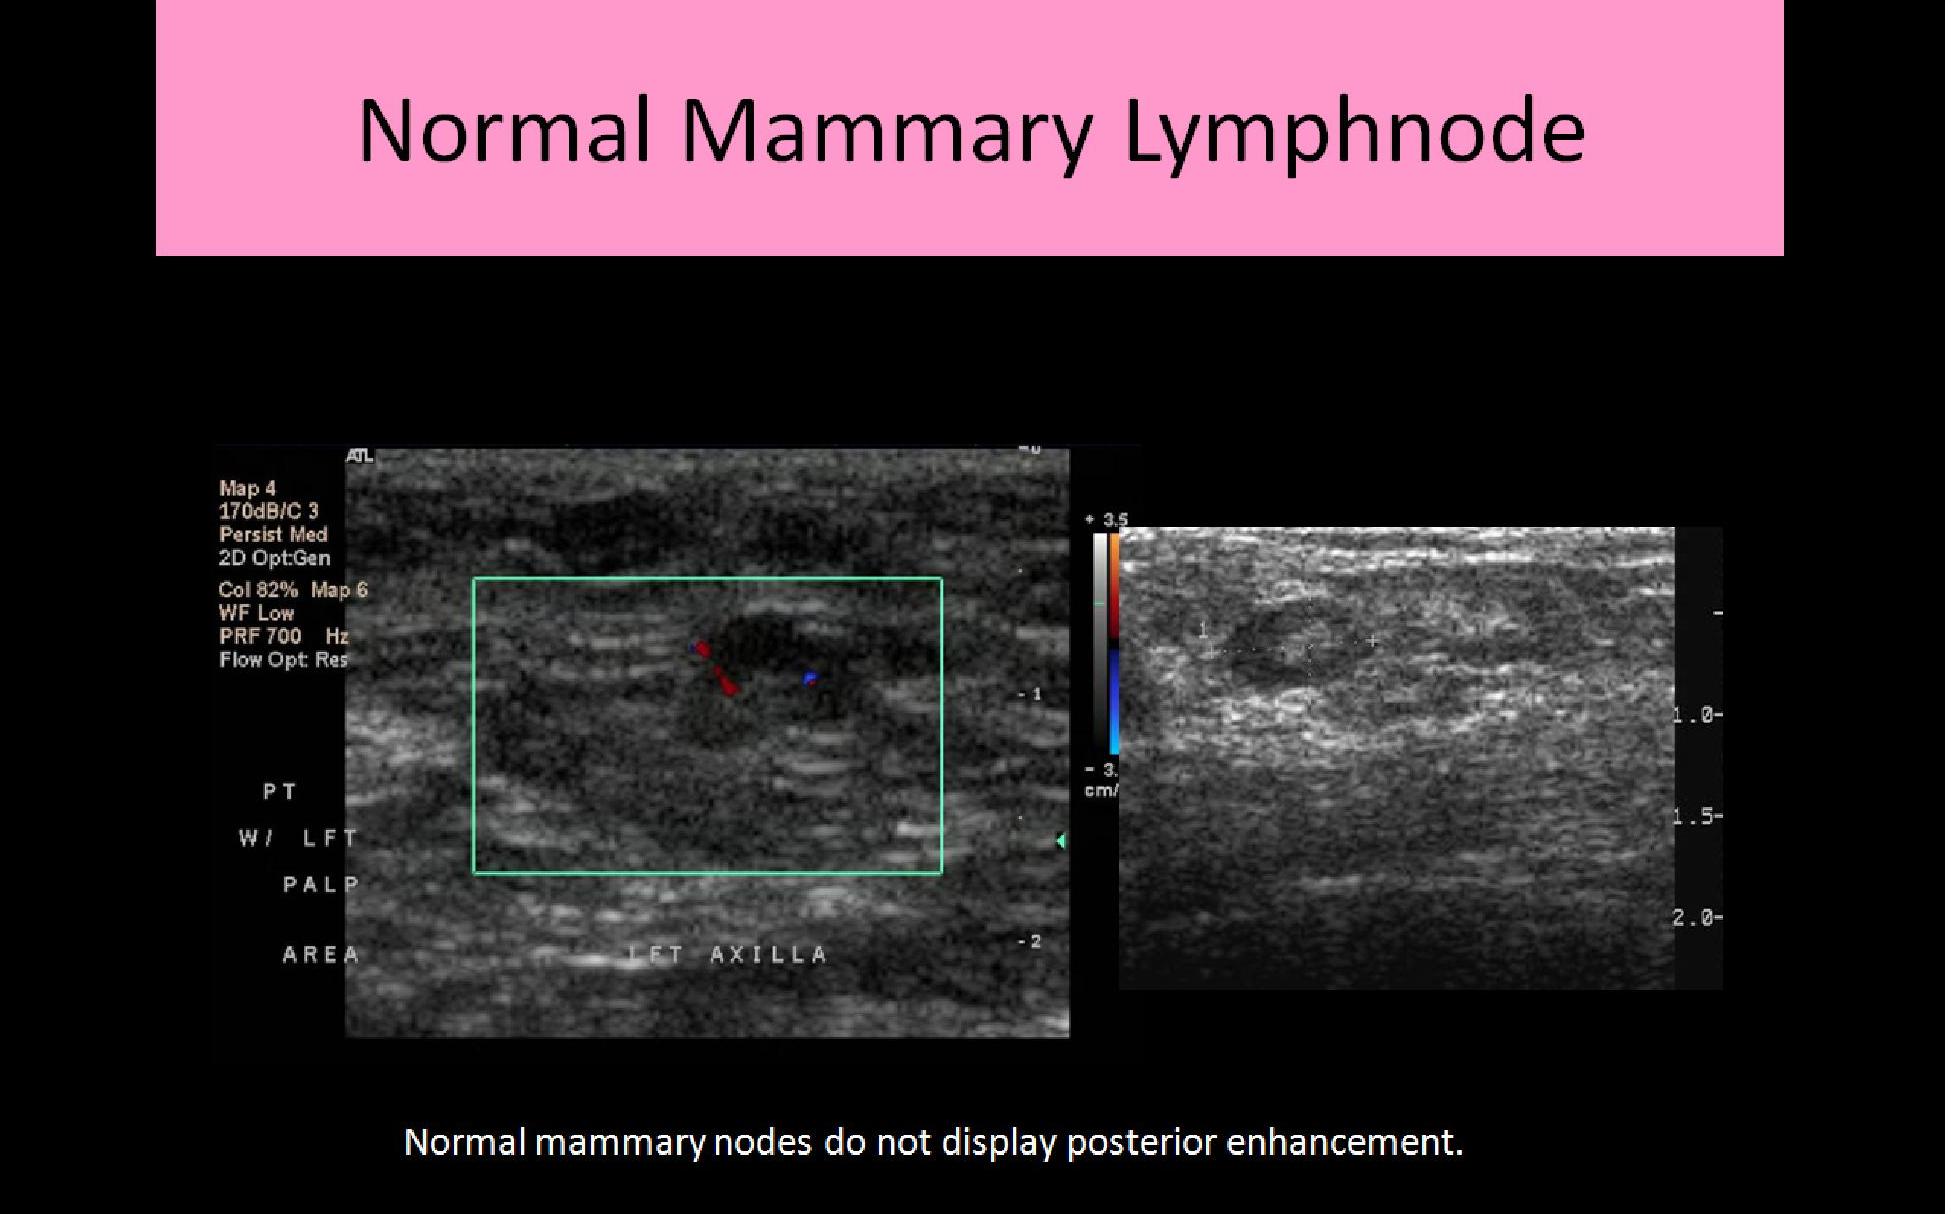 BREAST ANATOMY AND PHYSIOLOGY - Ultrasound Registry Review